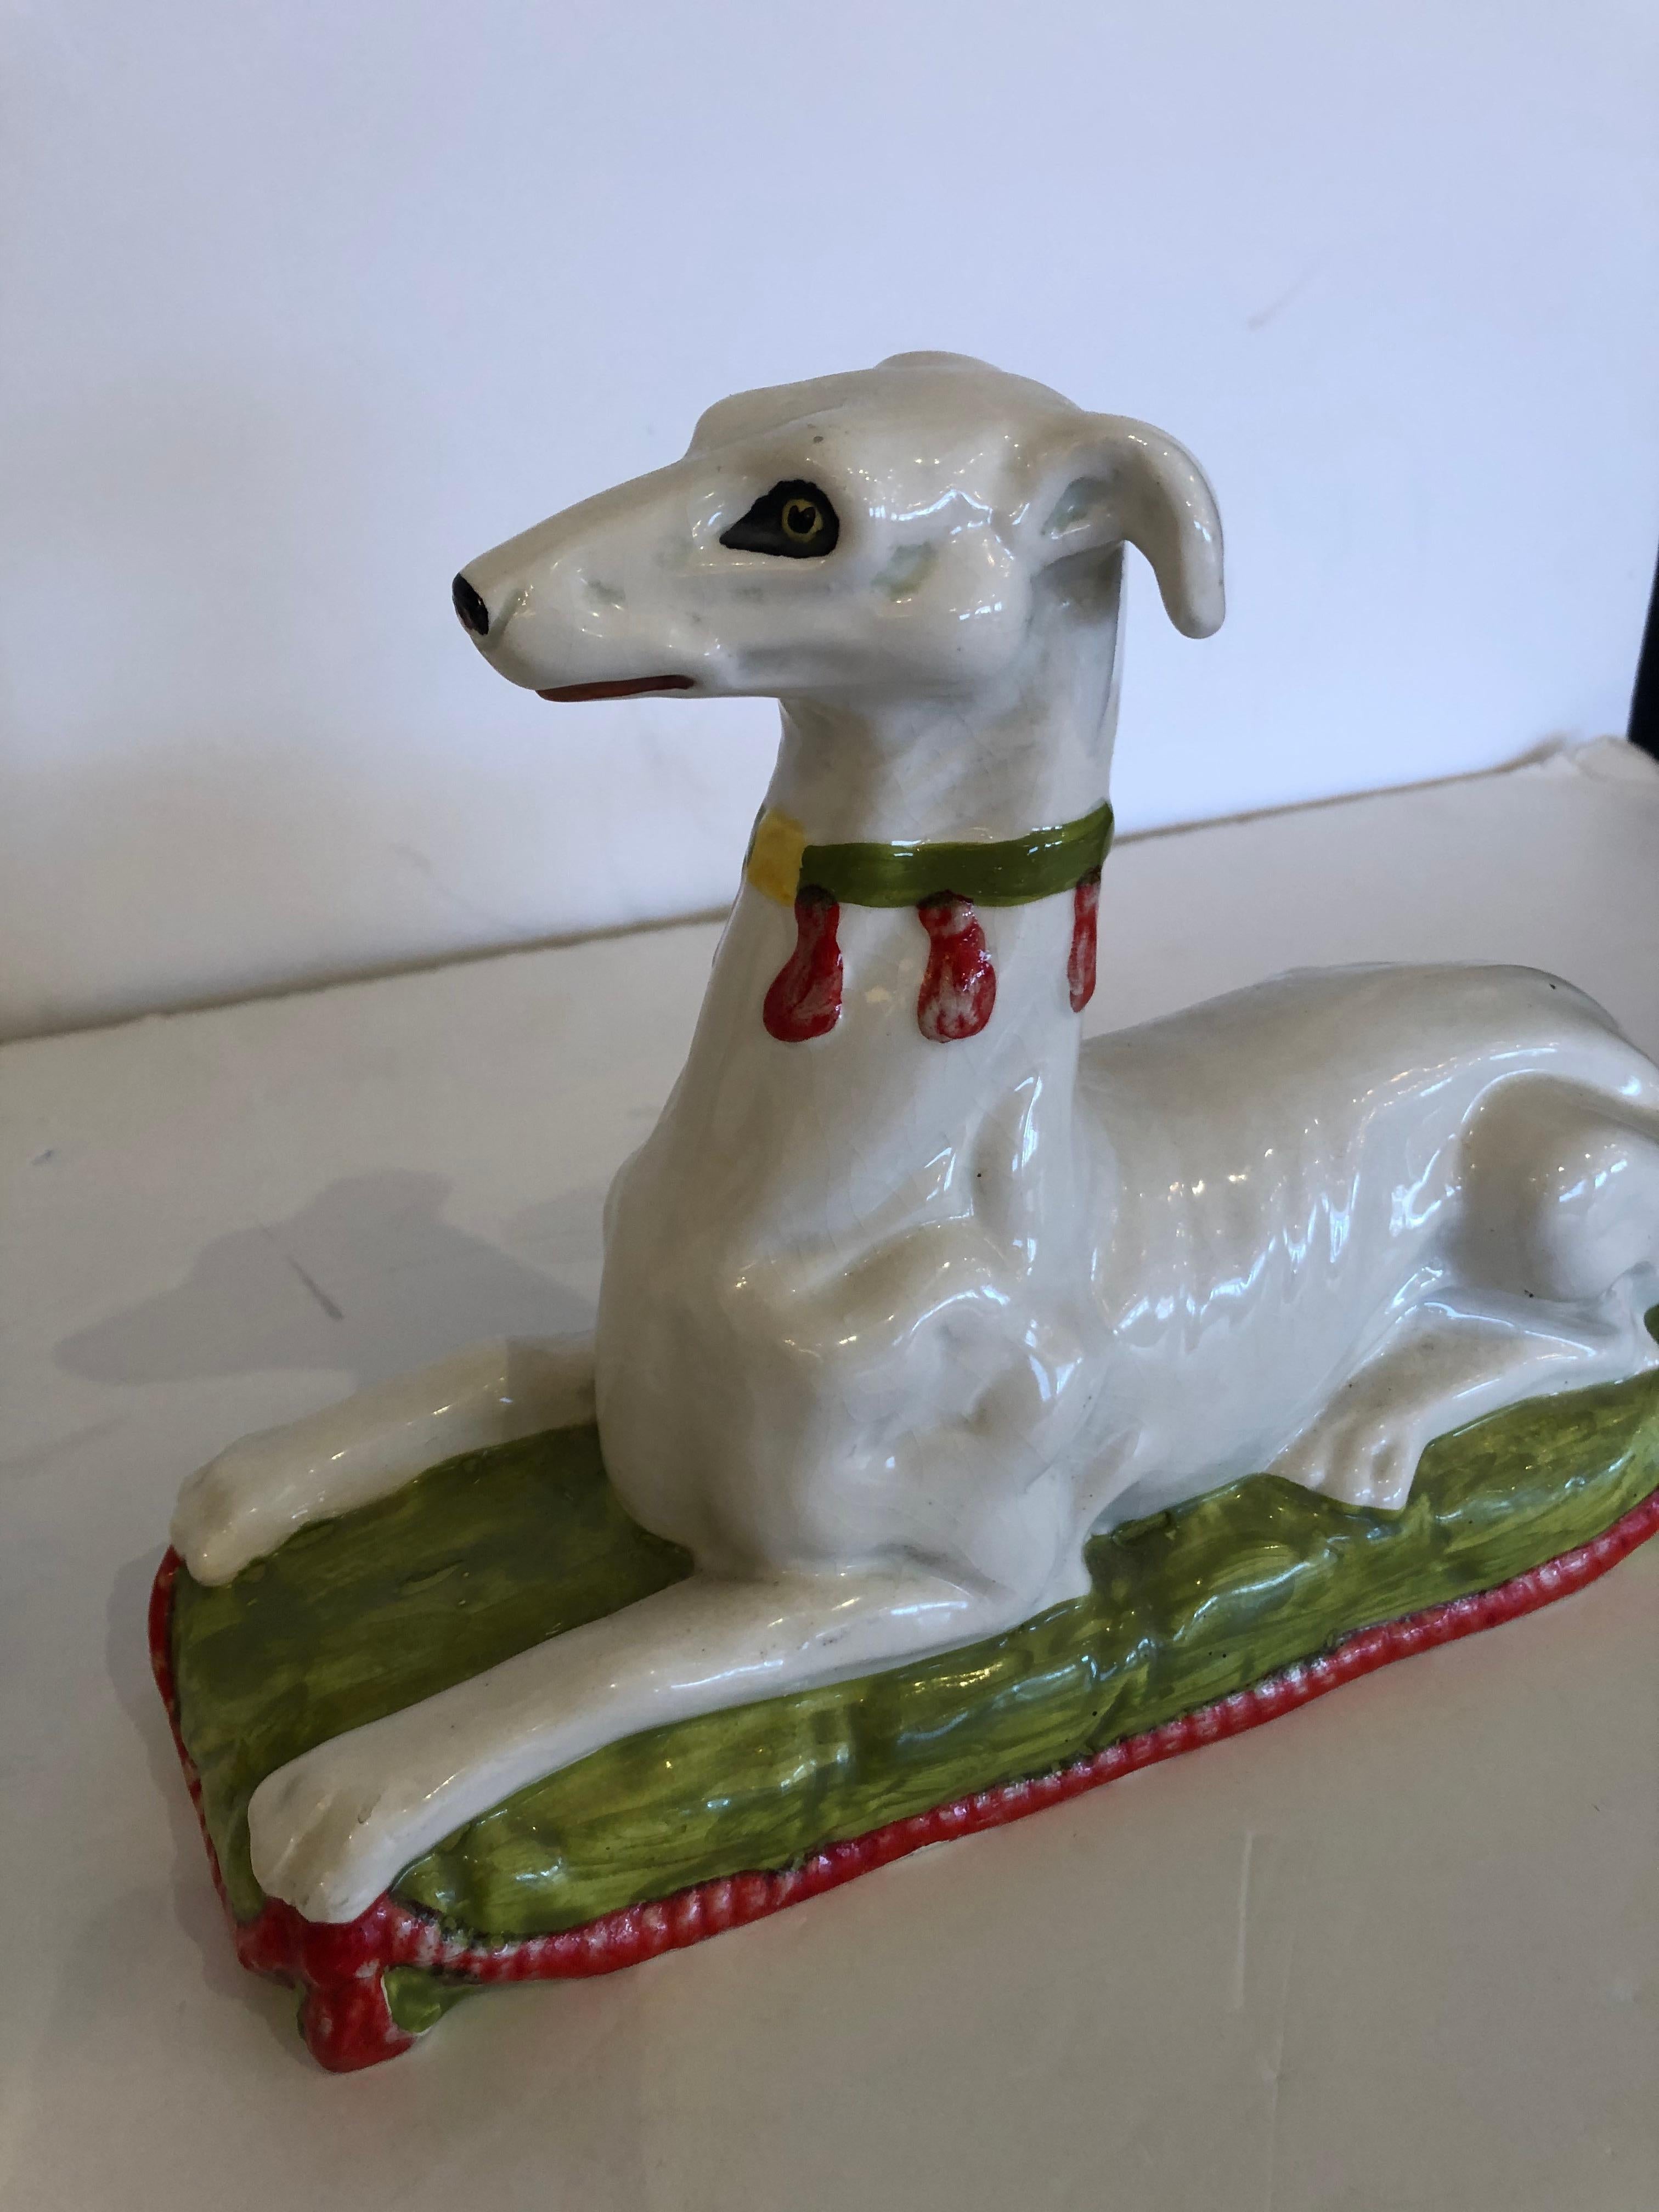 Wonderful eye-catching pair of Italian ceramic whippets regally posed and in a striking color palette of white, orange and green.